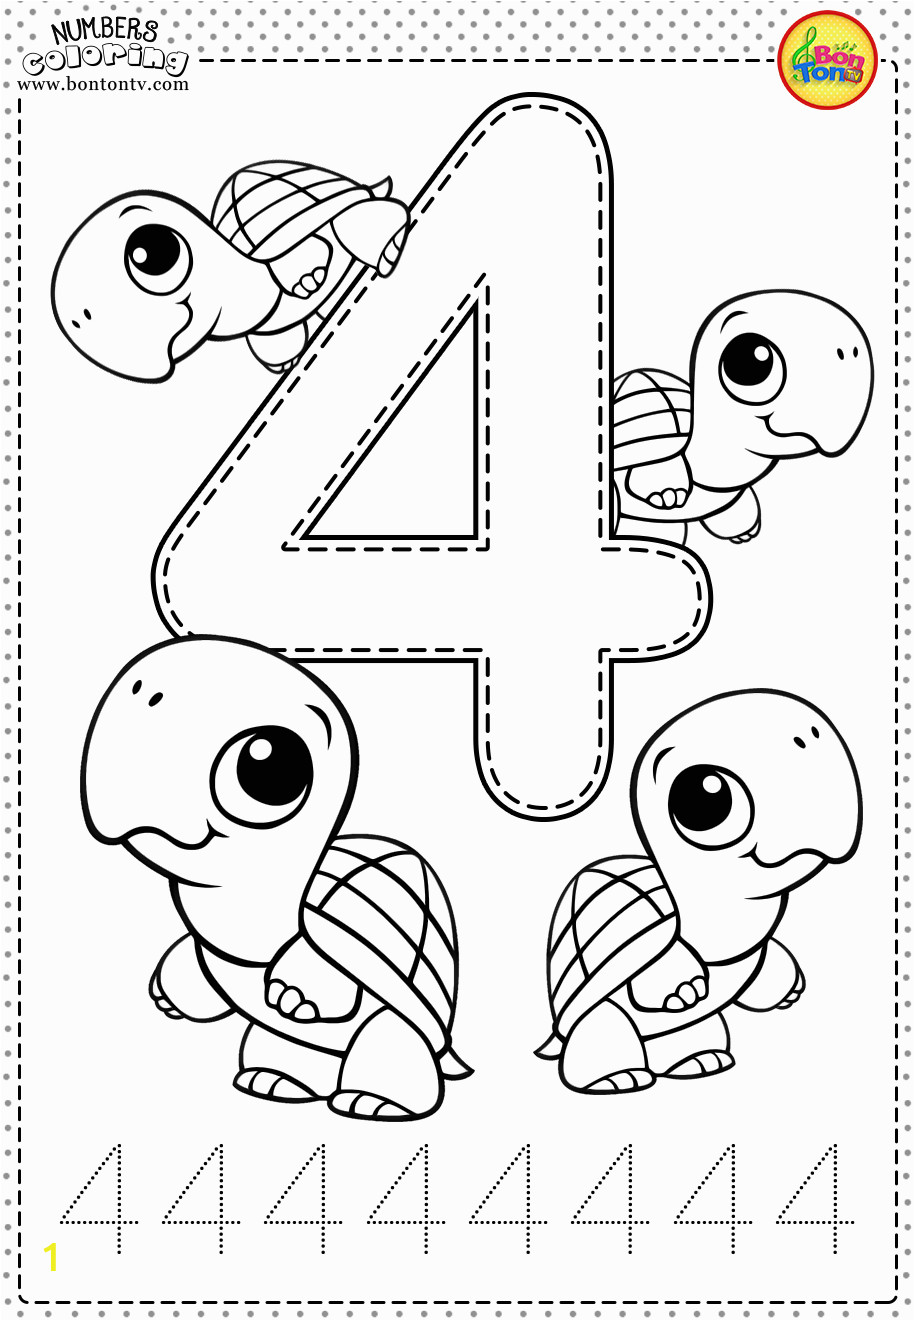 Coloring Pages Printables with Numbers Number 4 Preschool Printables Free Worksheets and